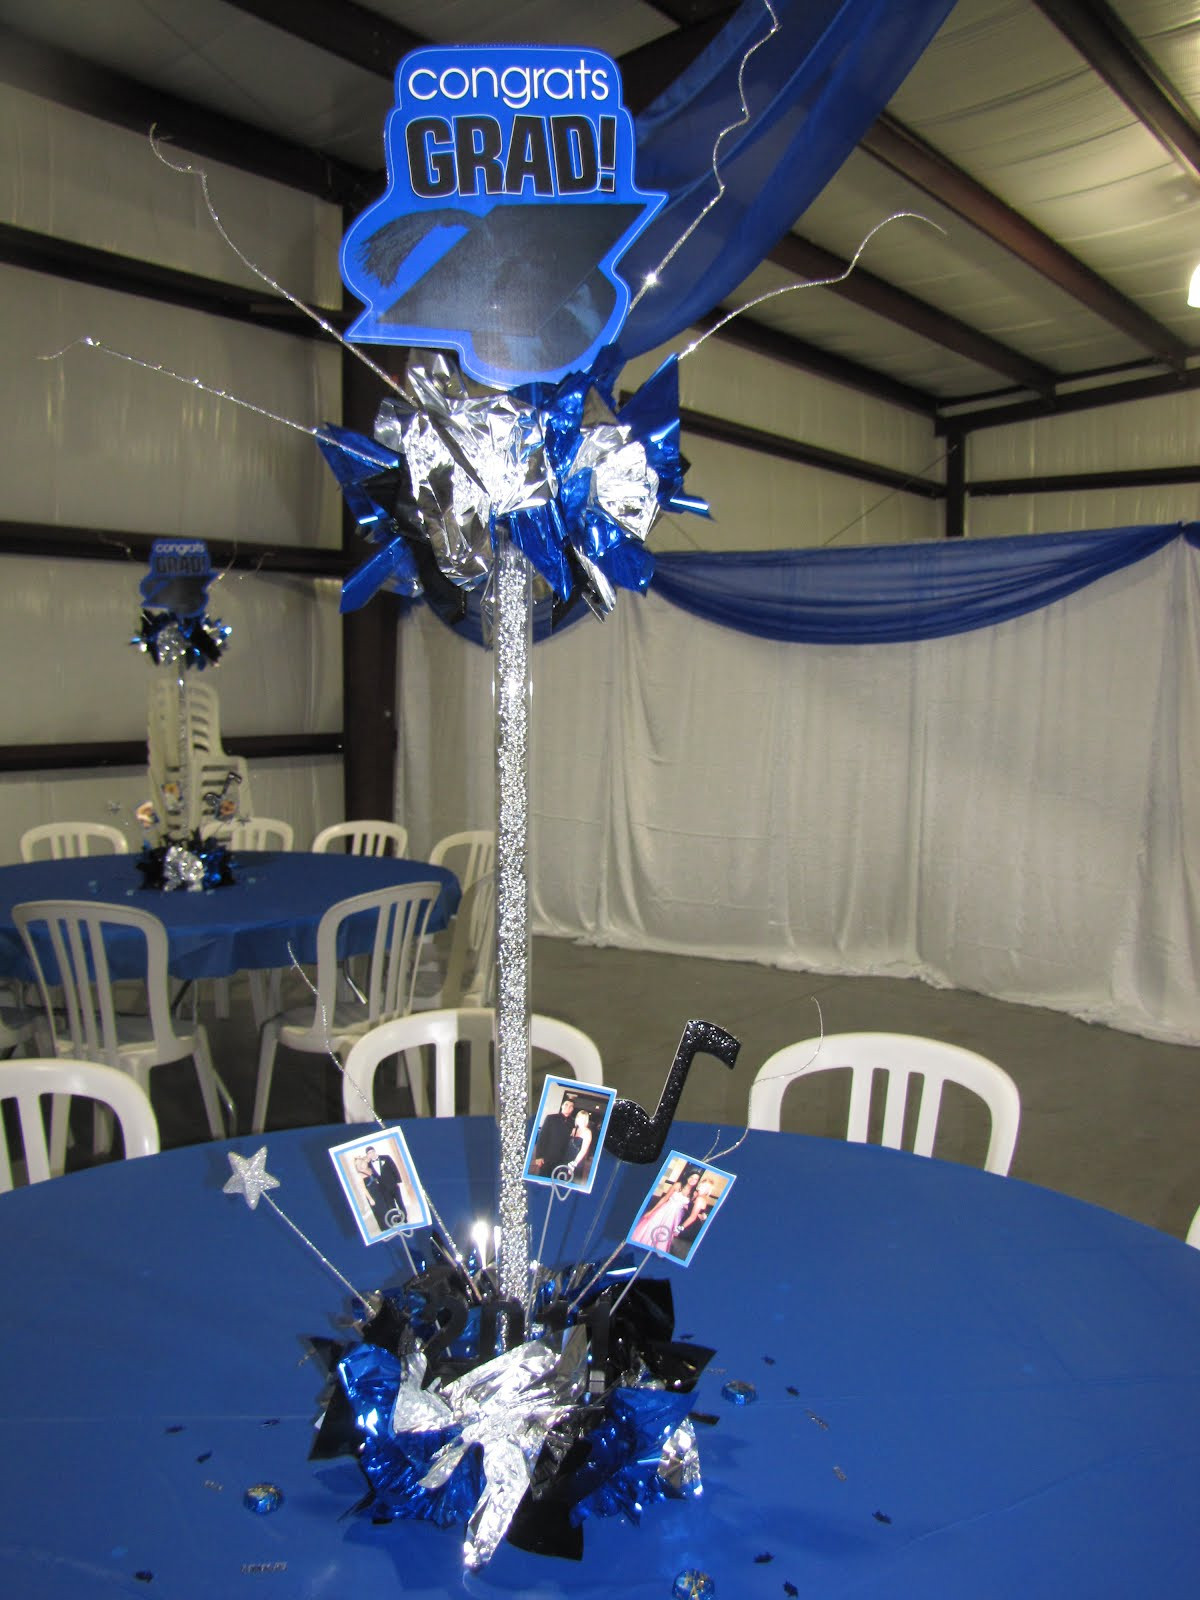 Ideas For Table Centerpieces For Graduation Party
 Party People Event Decorating pany Graduation Decor